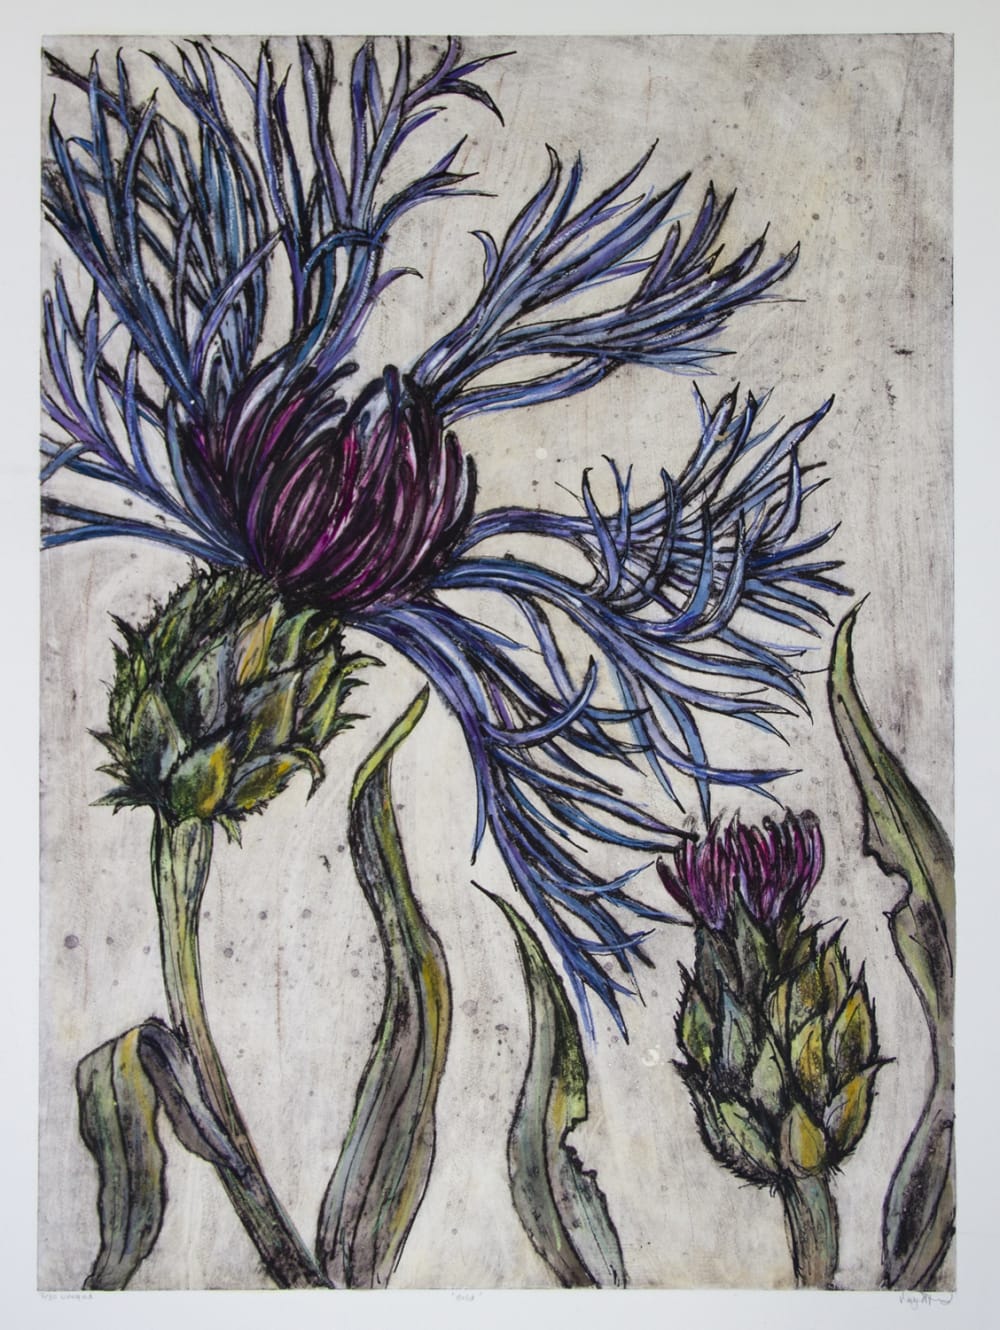 Vicky Oldfield collagraph print showing a close up perspective of thistle flowers in periwinkle blue & magenta purple petals with mossy green stems on a speckled grey background.